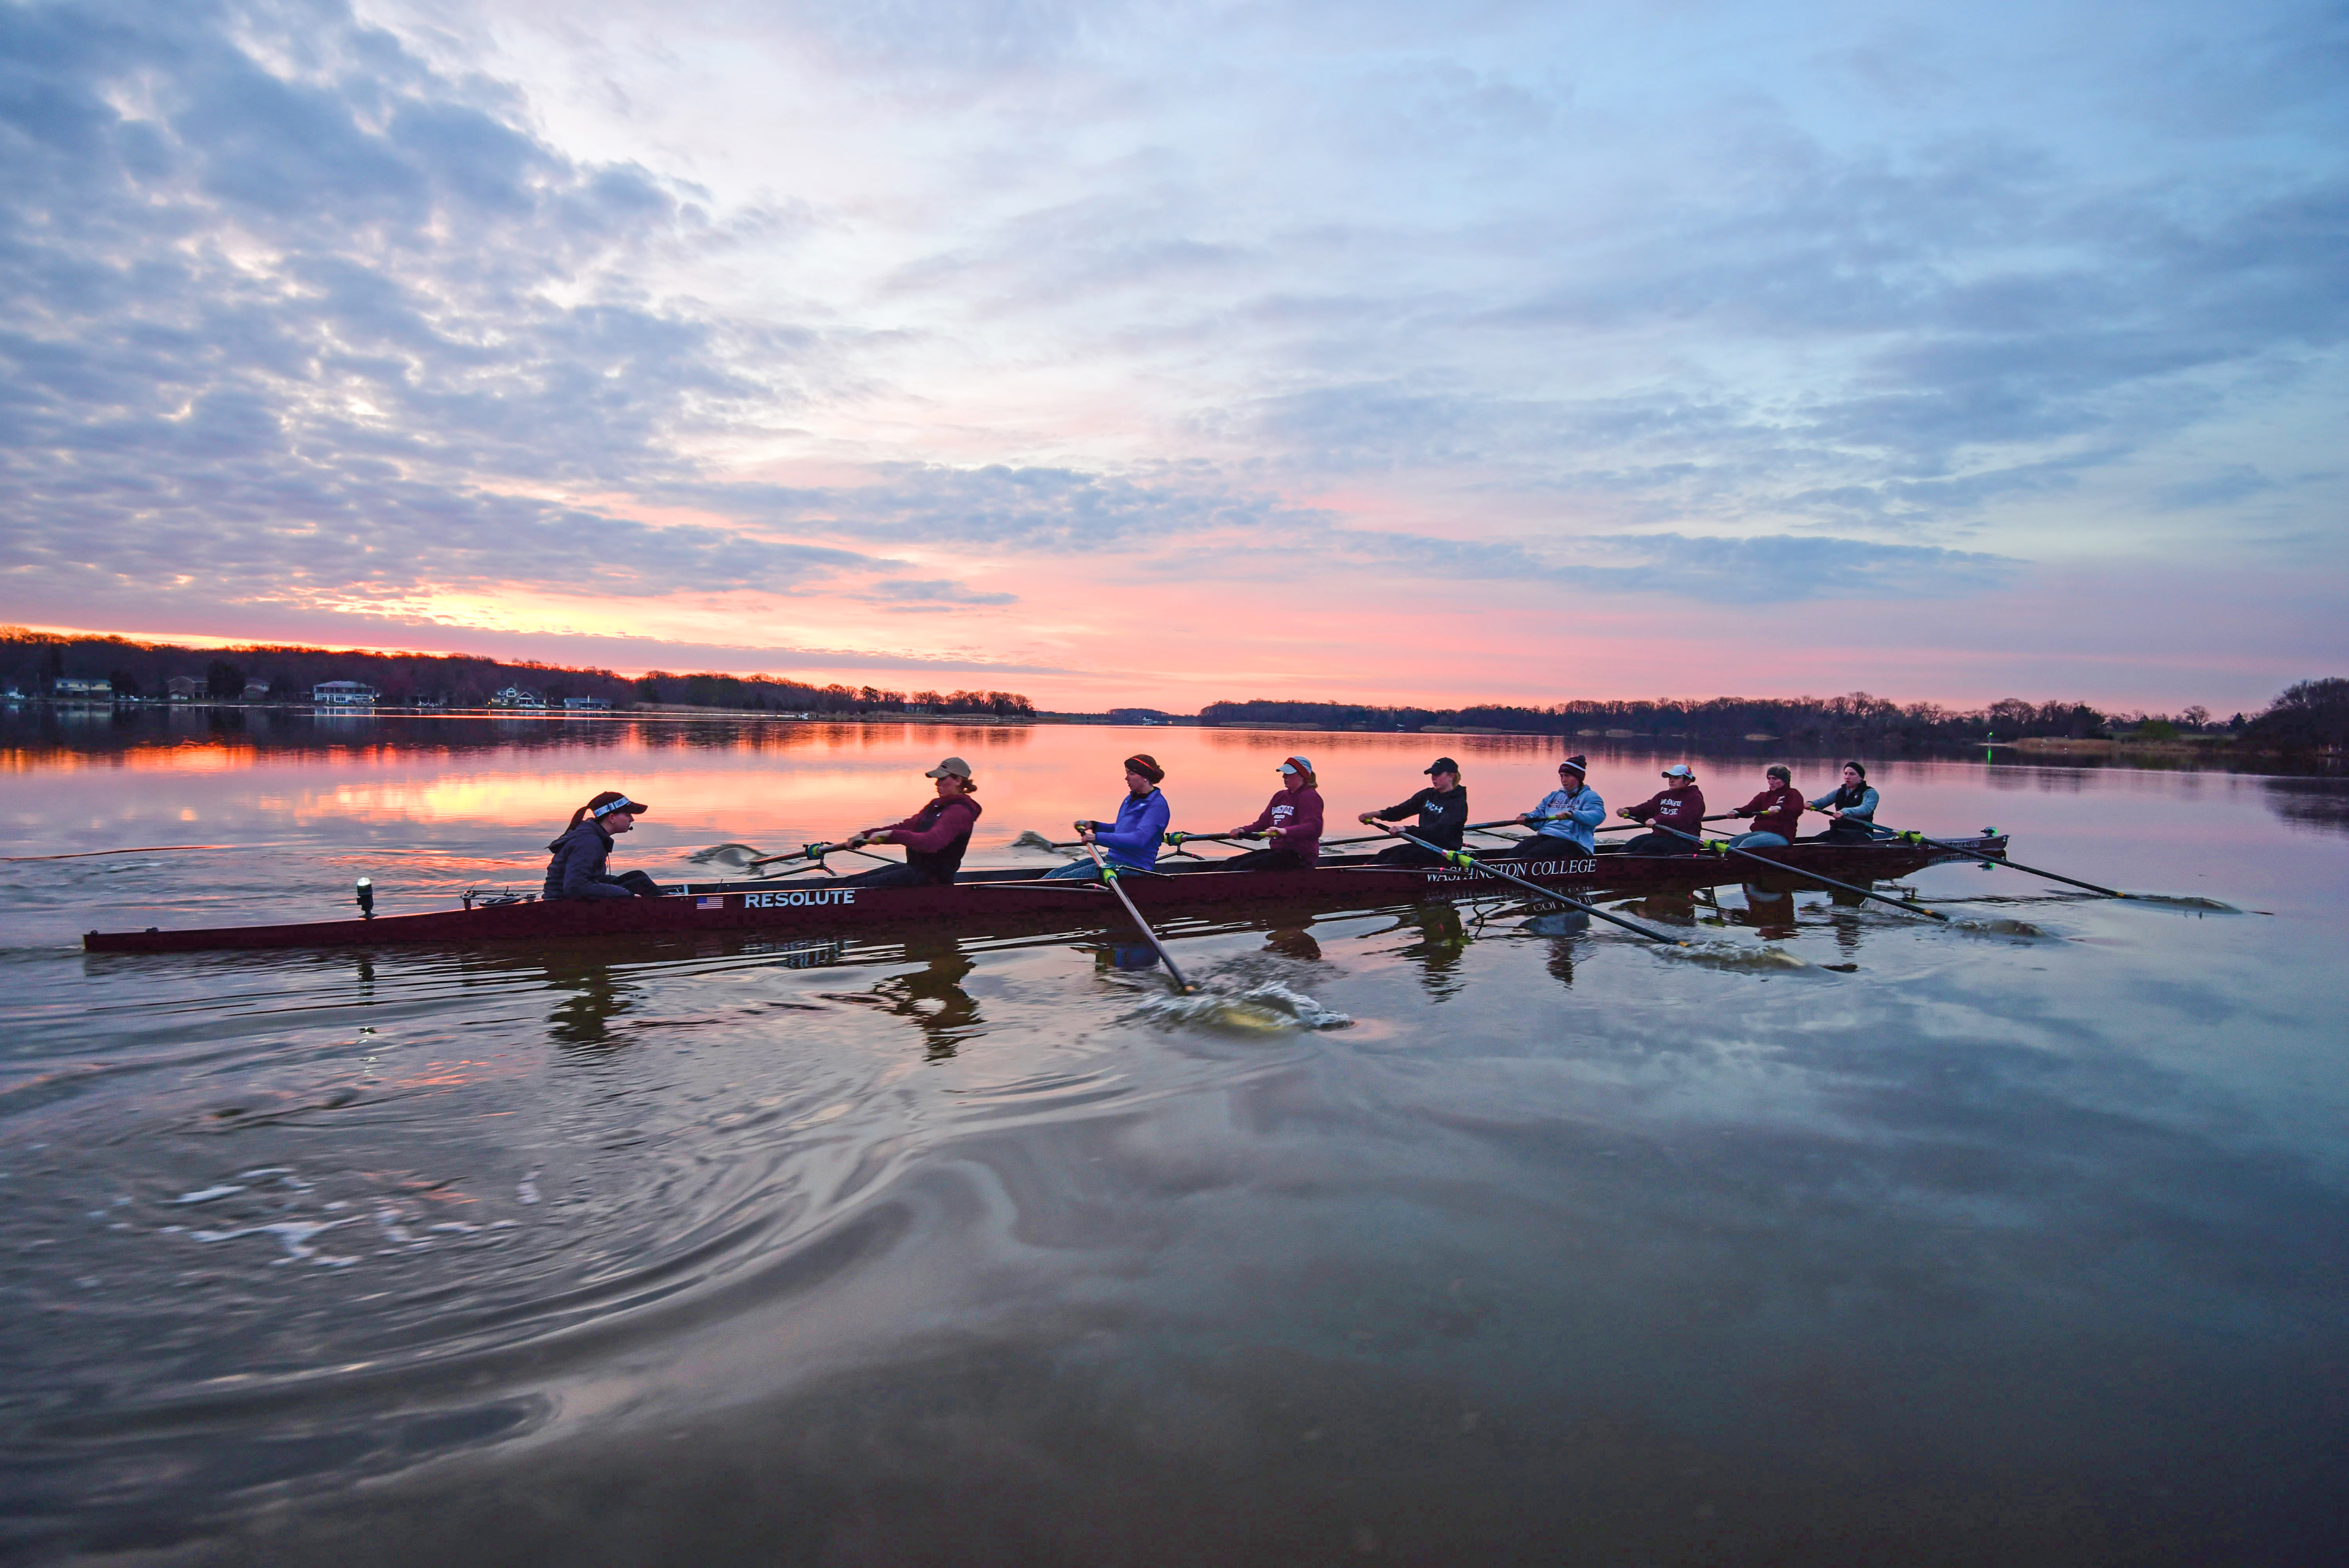 Washington College rowers on the water in front of a pink sunrise 